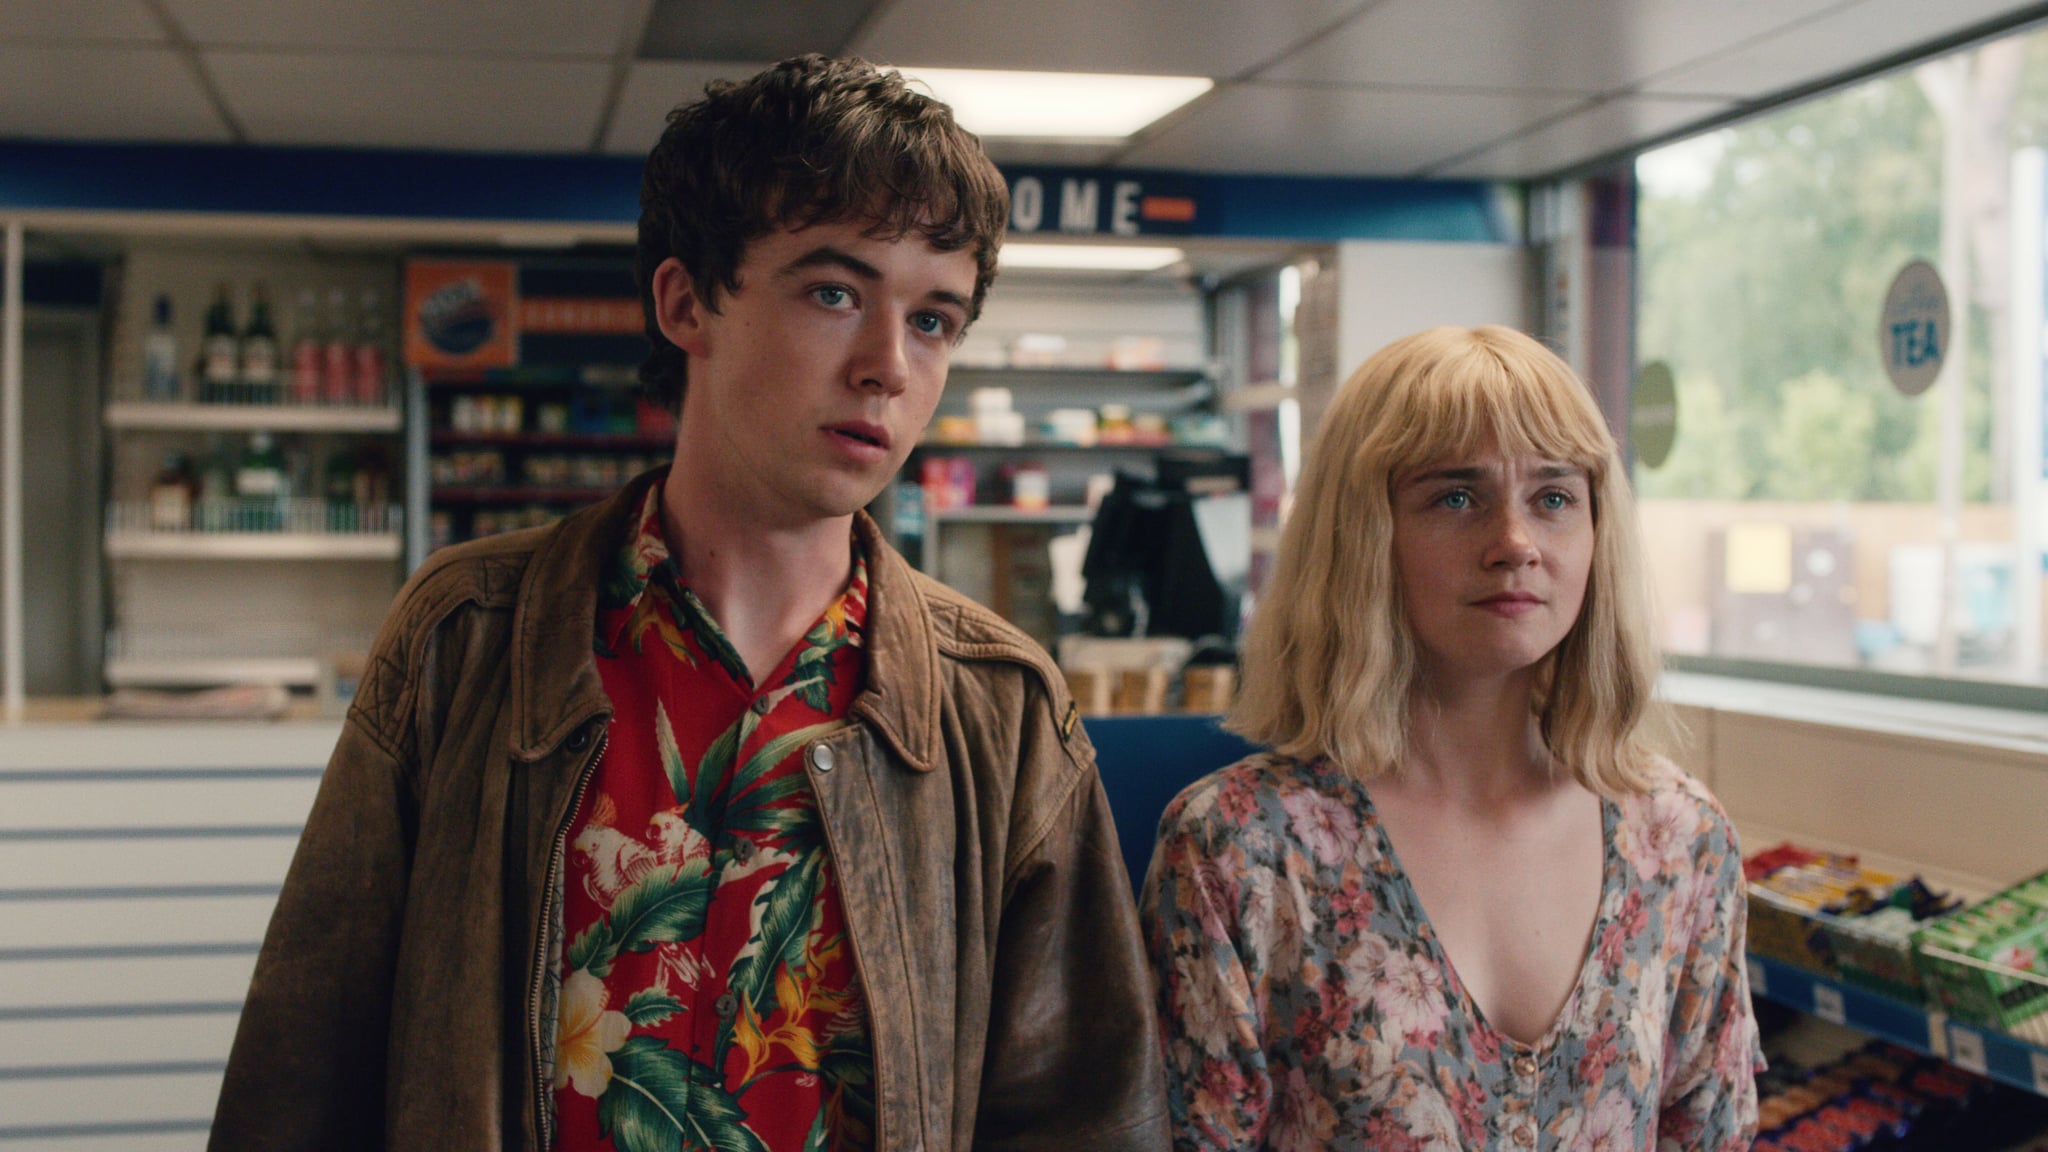 THE END OF THE F***ING WORLD, from left: Alex Lawther, Jessica Barden, (Season 1, aired in U.S. on Jan. 5, 2018). photo: Netflix / courtesy Everett Collection